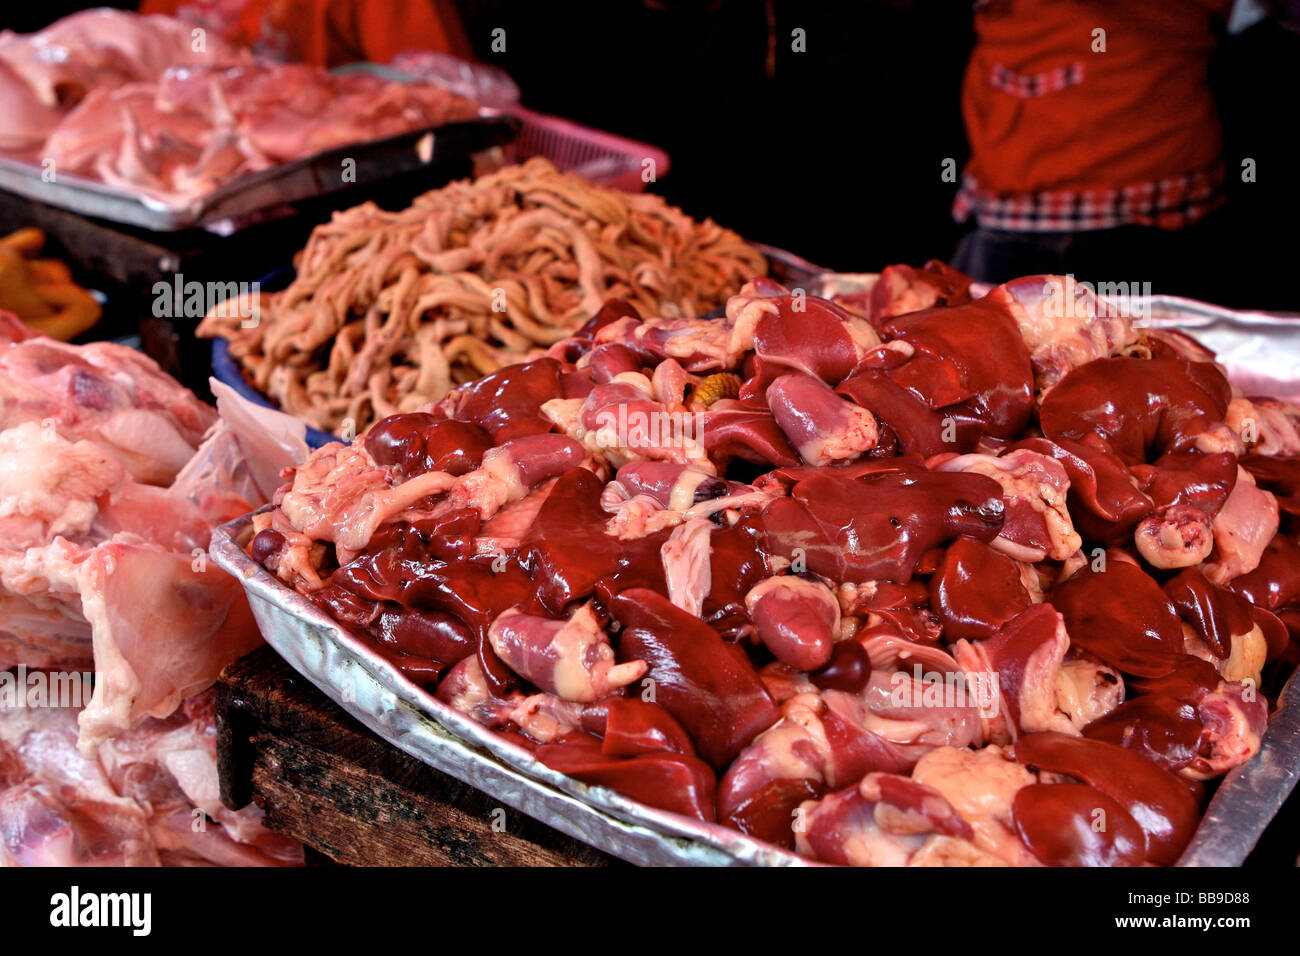 red meat and offal on the market Stock Photo